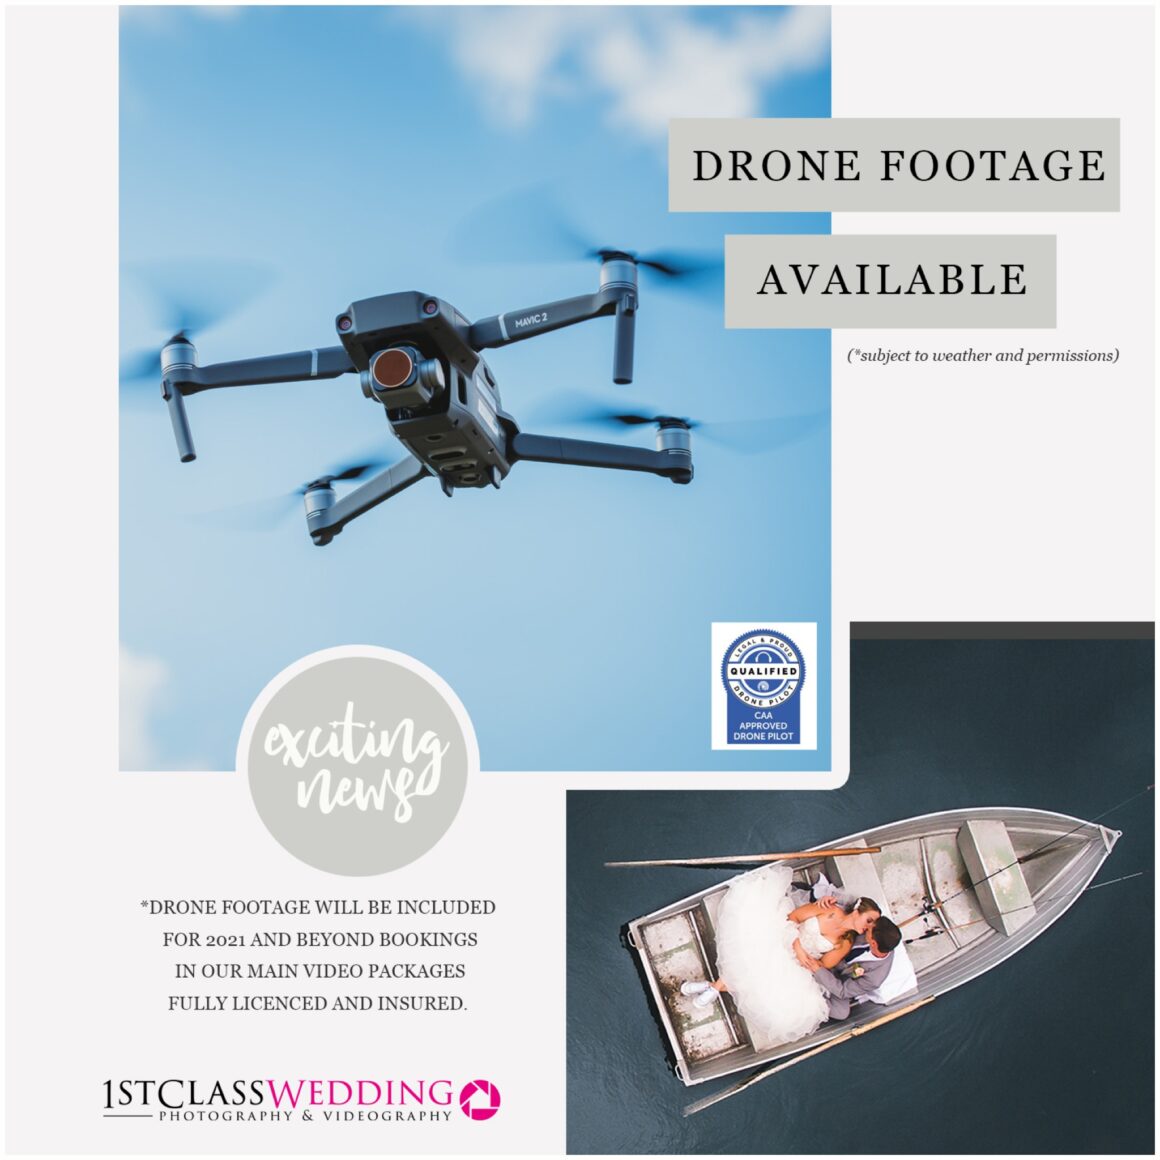 Drone offering wedding photography, videography services with license.